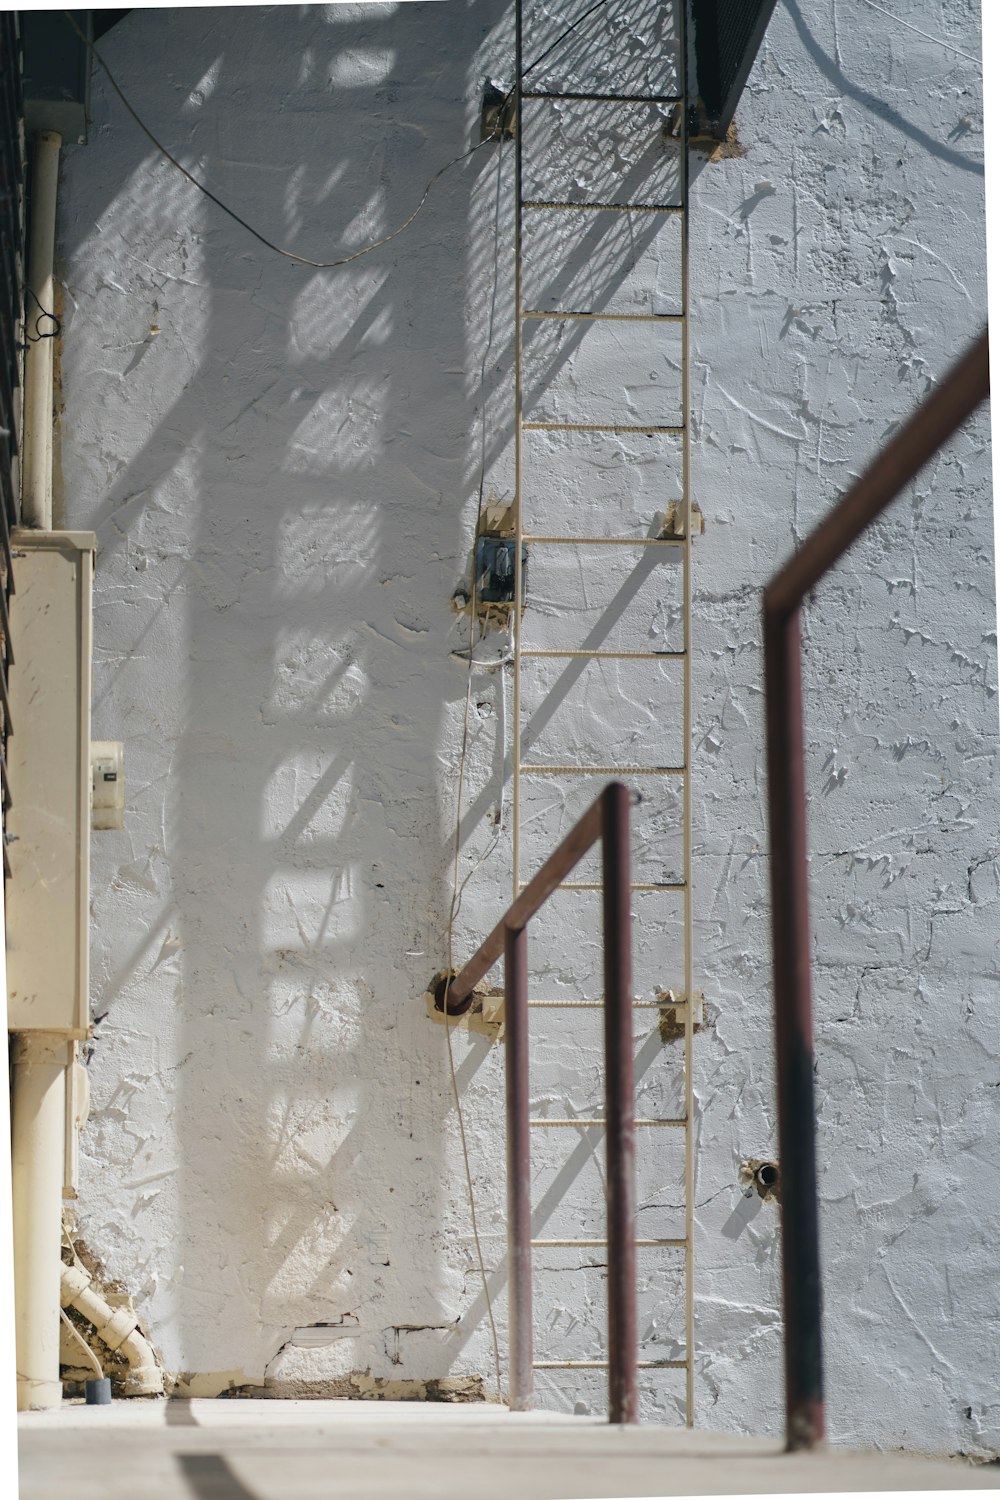 a ladder leaning against a wall